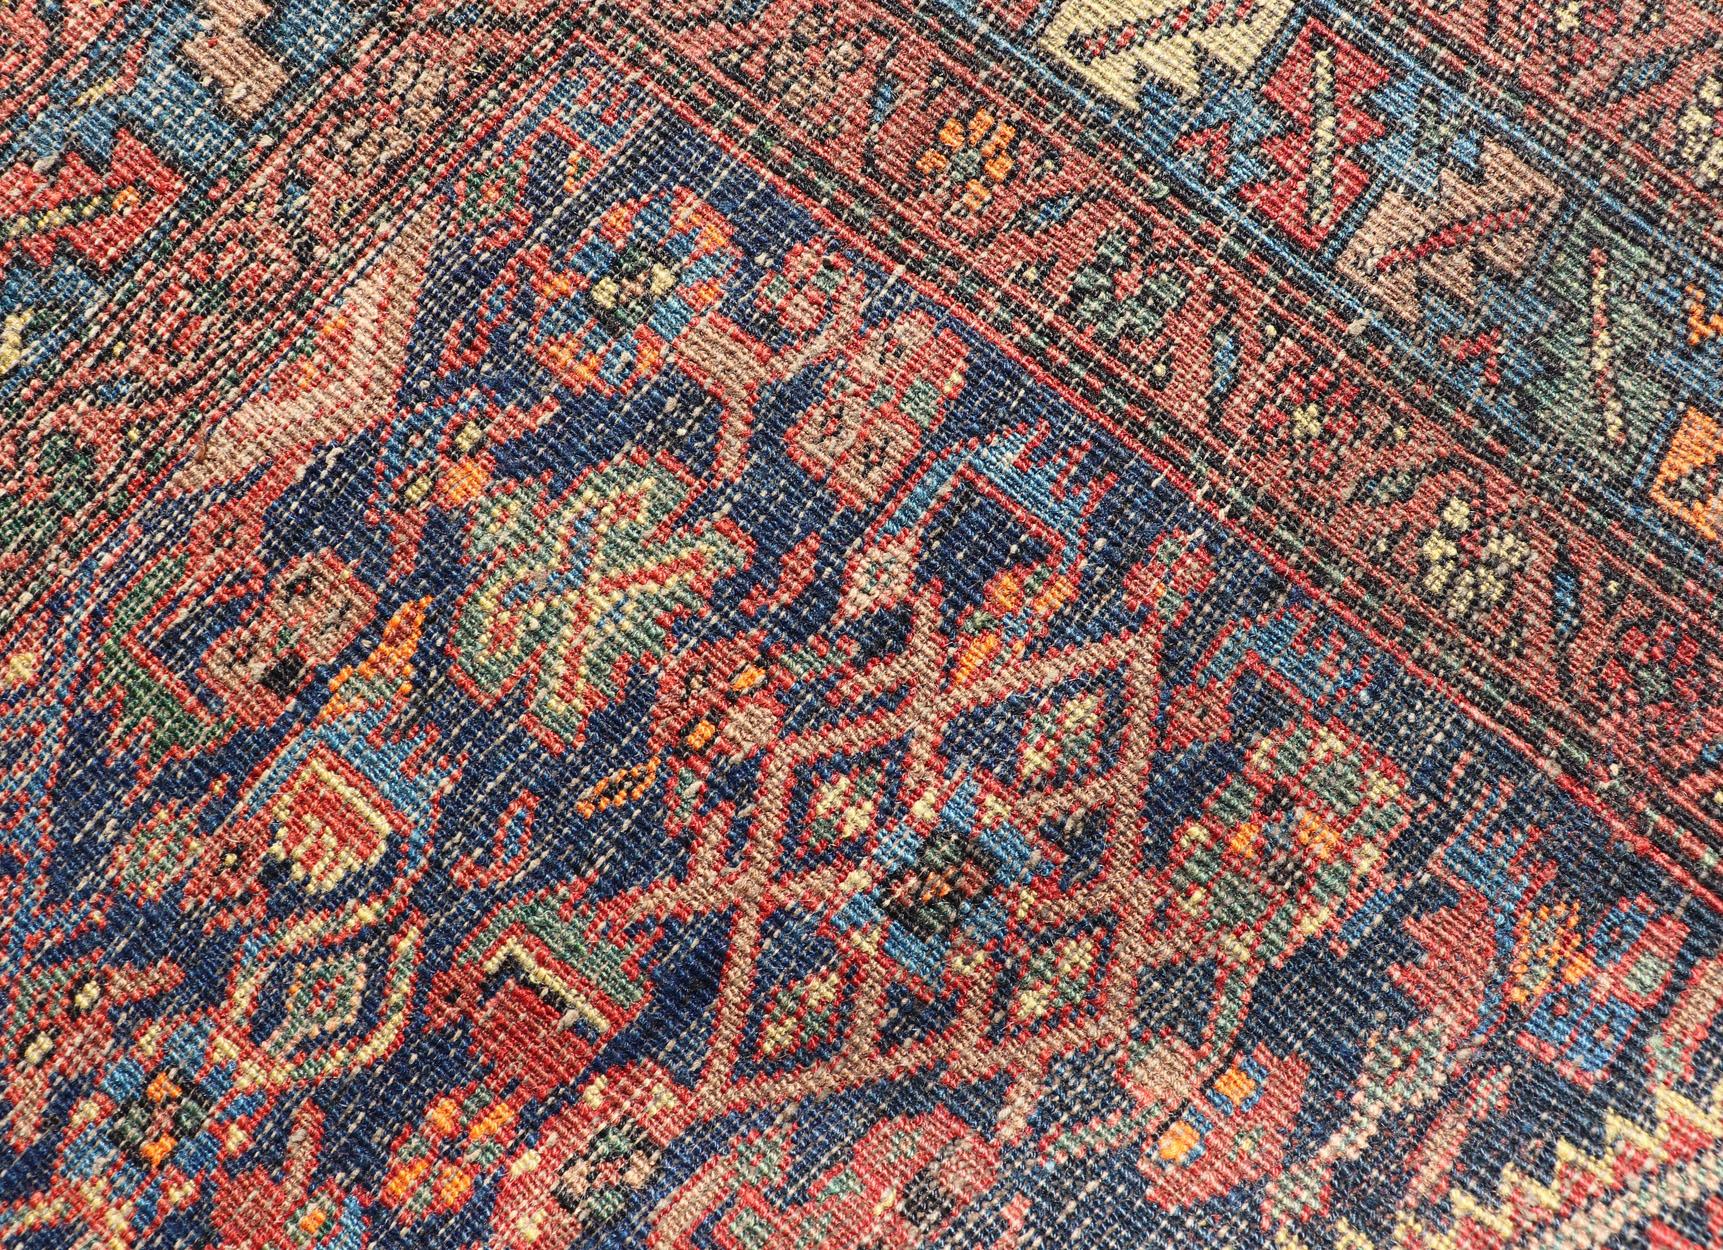 Antique Persian Bidjar Carpet with Variety of Blue Colors, Red, and Salmon For Sale 9